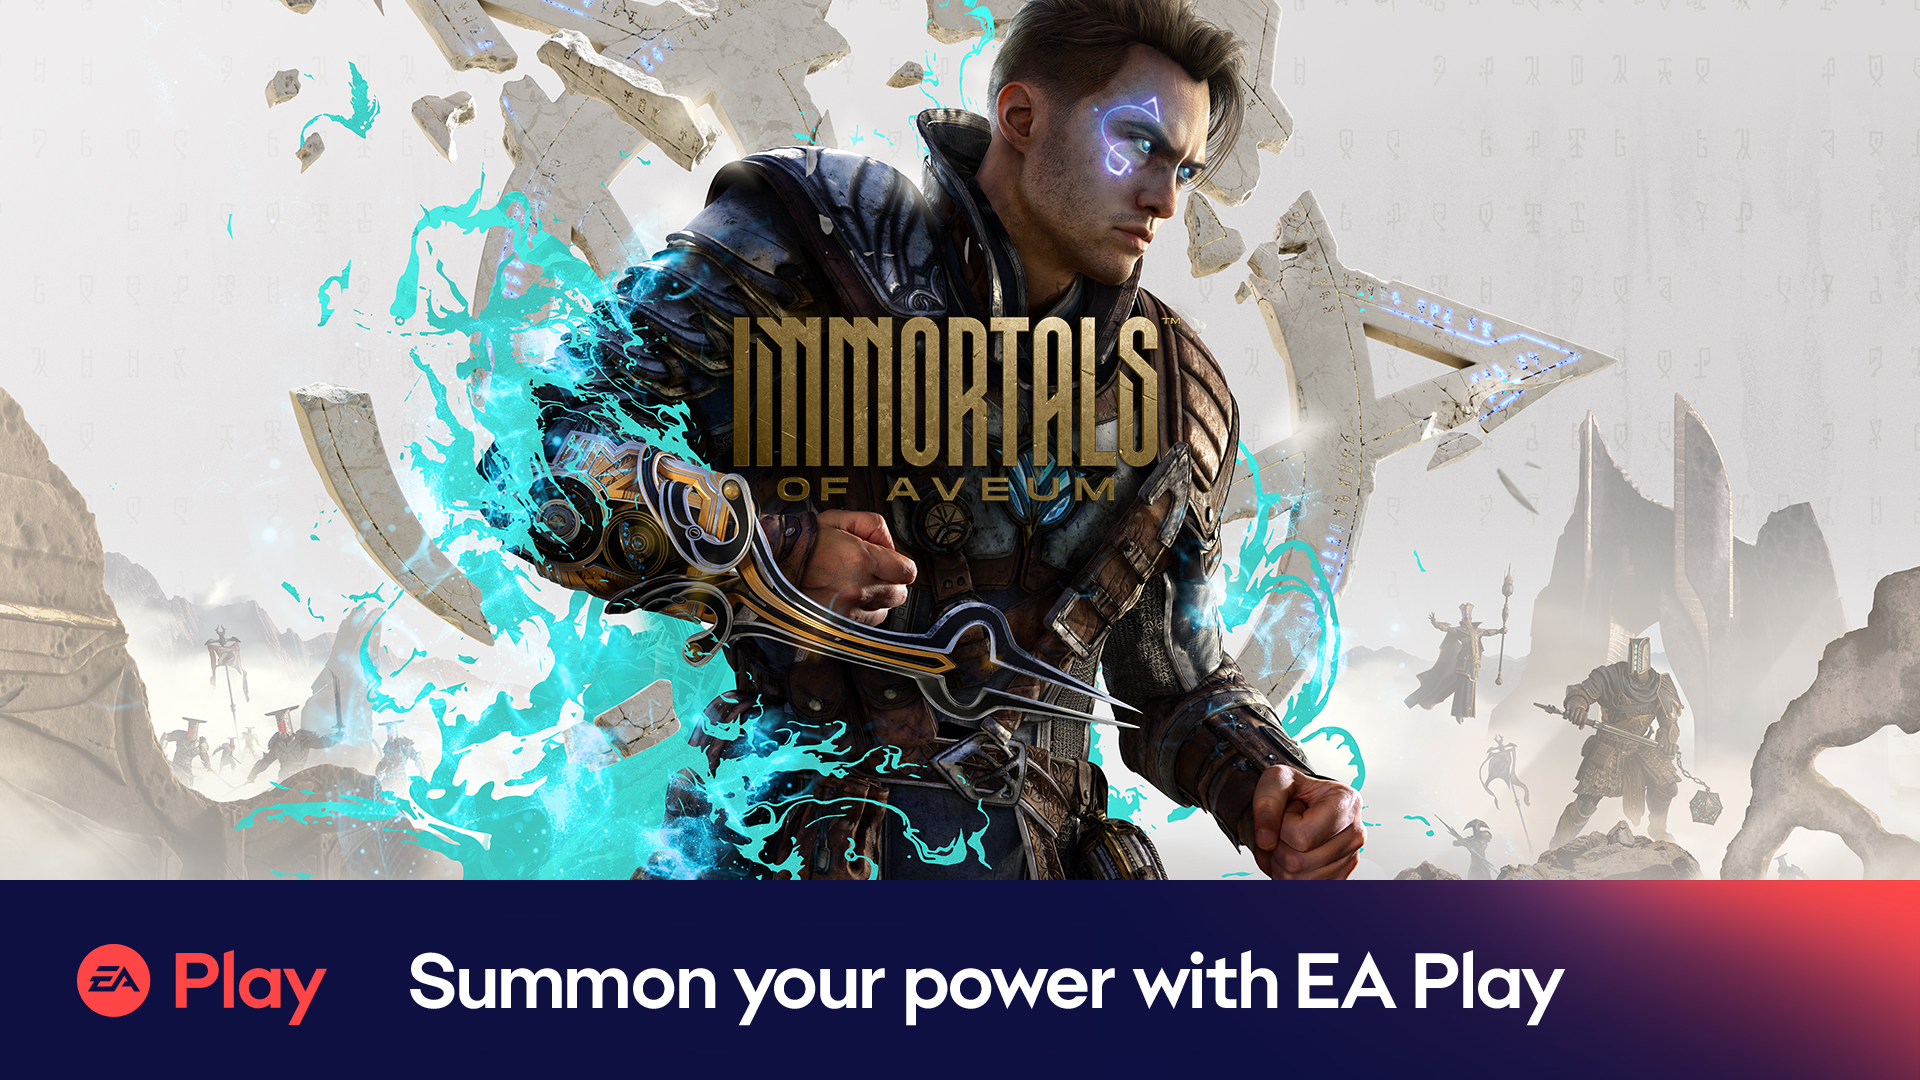 EA Play: Immortals of Aveum Joins the Play List Alongside New Member Rewards this Month